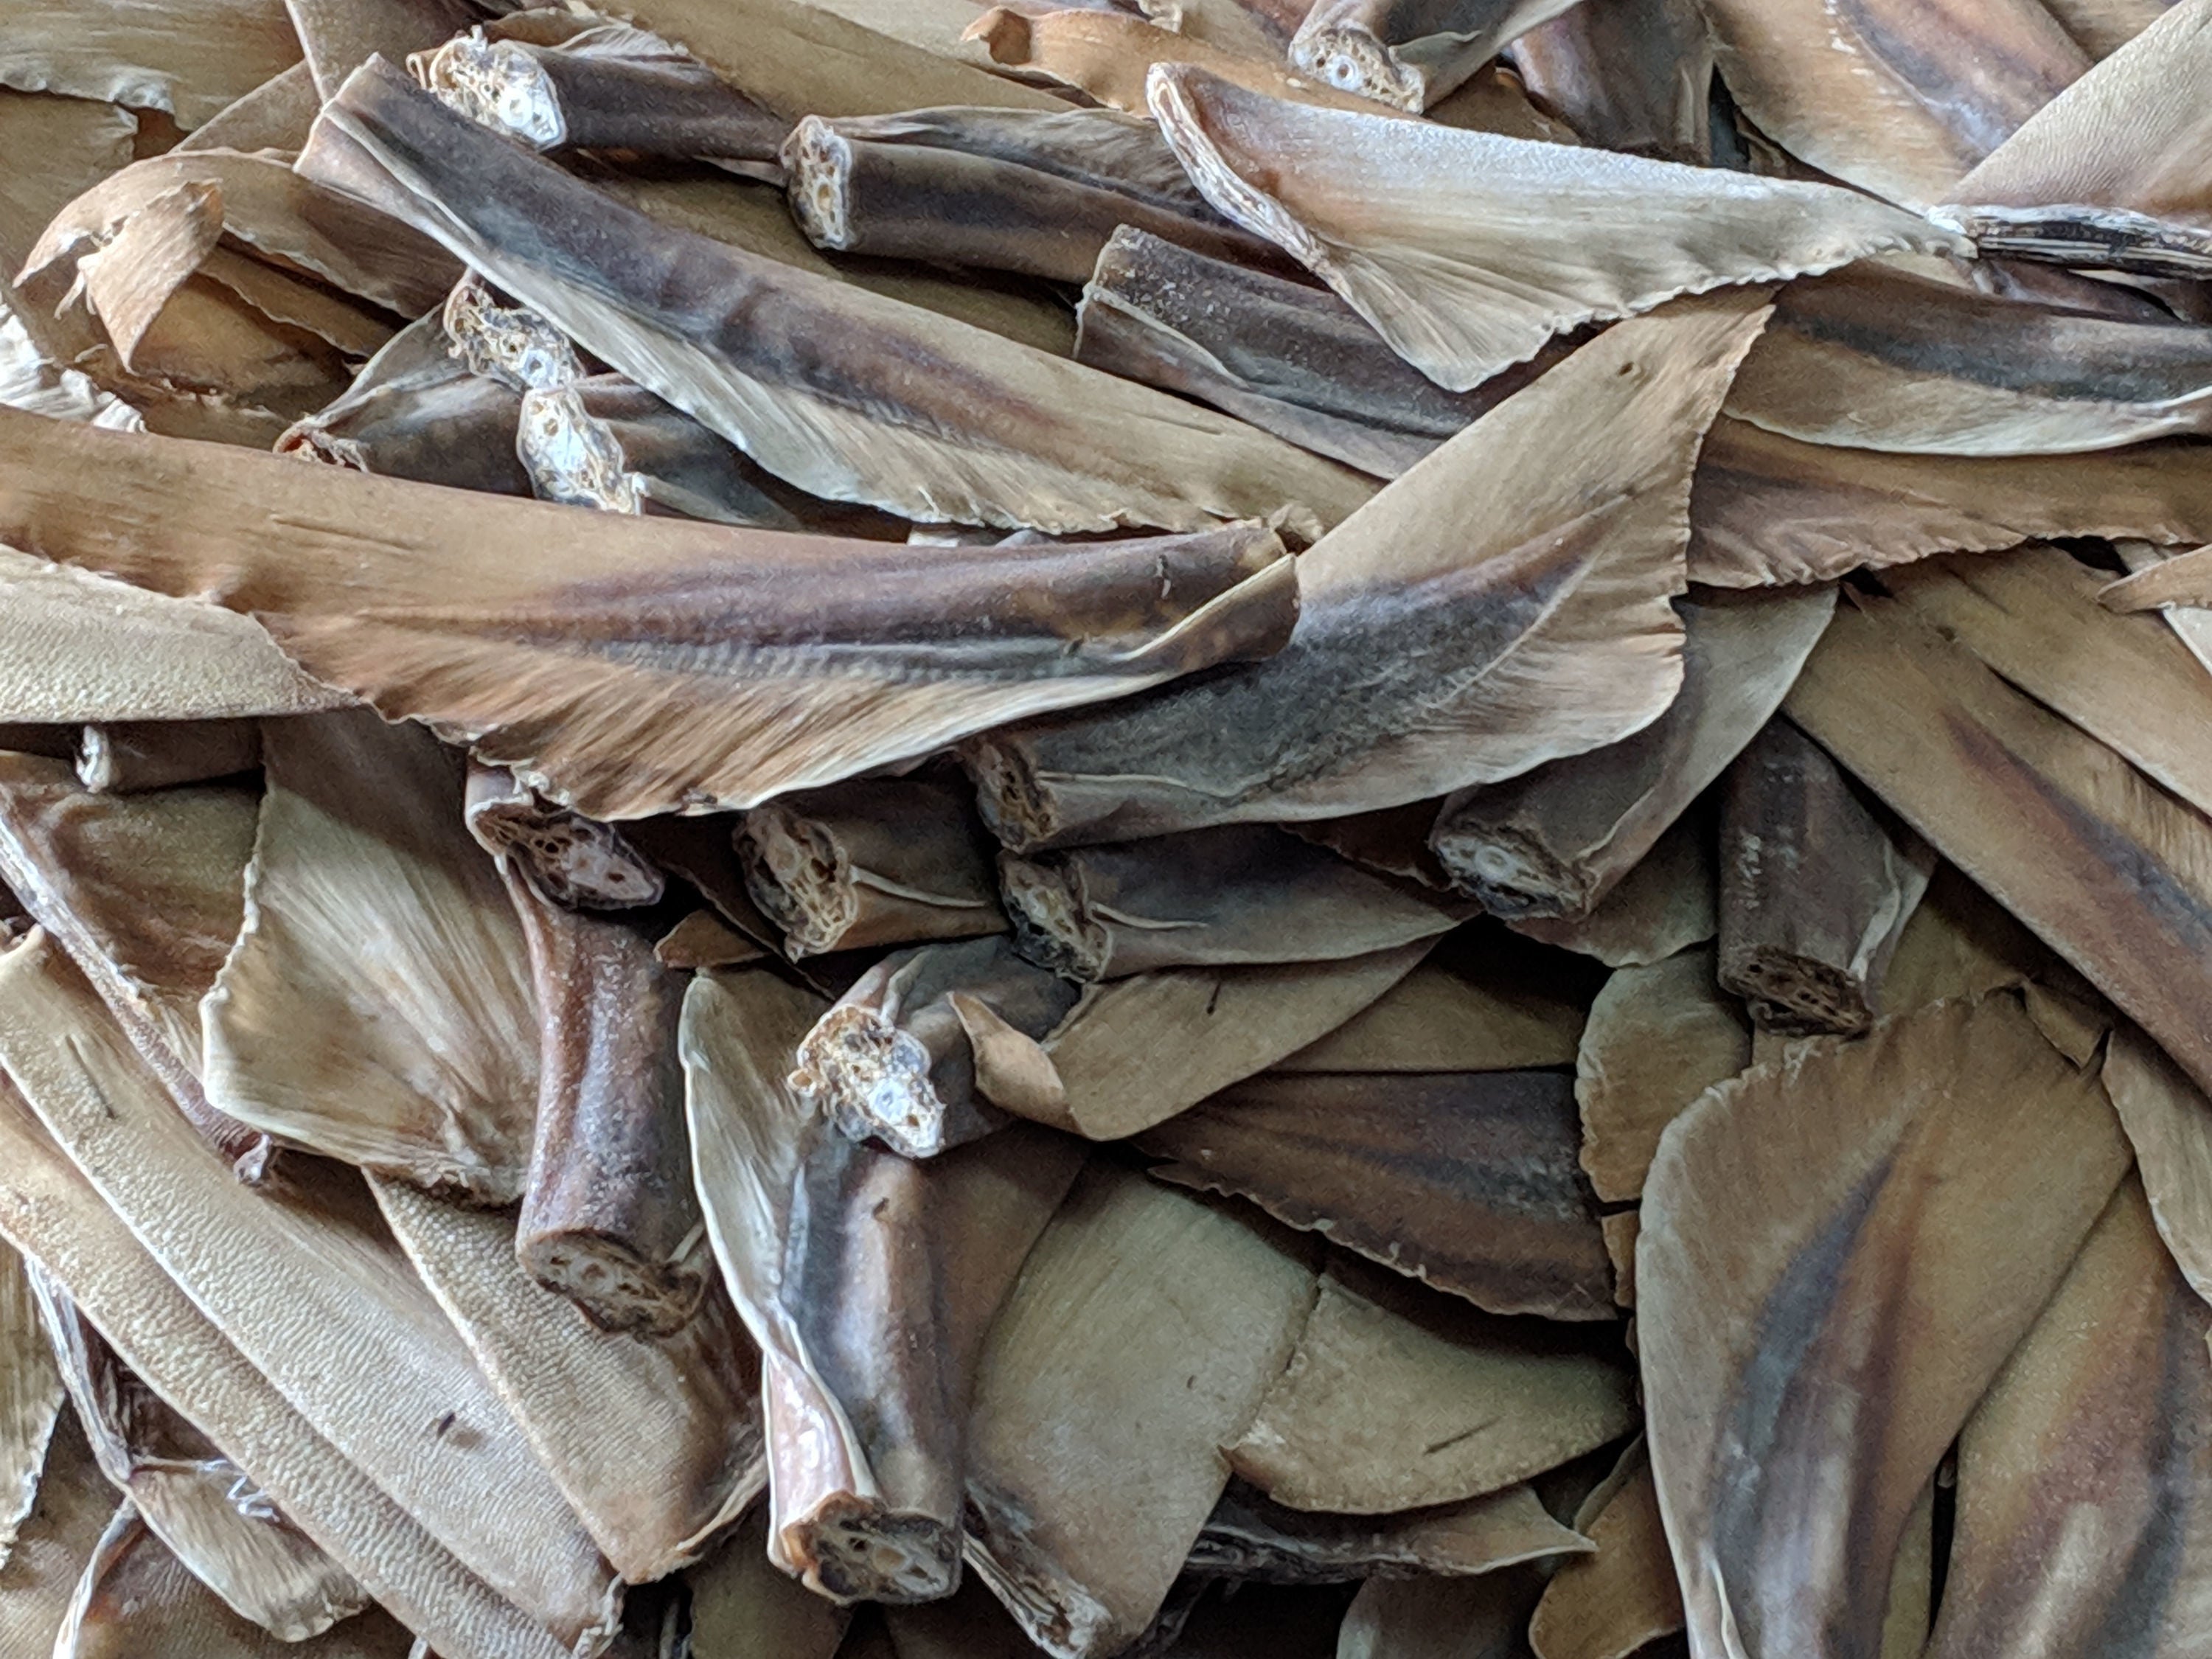 Importing and exporting detached shark fins, including shark fin products such as tinned shark fin soup, is set to be banned by the UK government